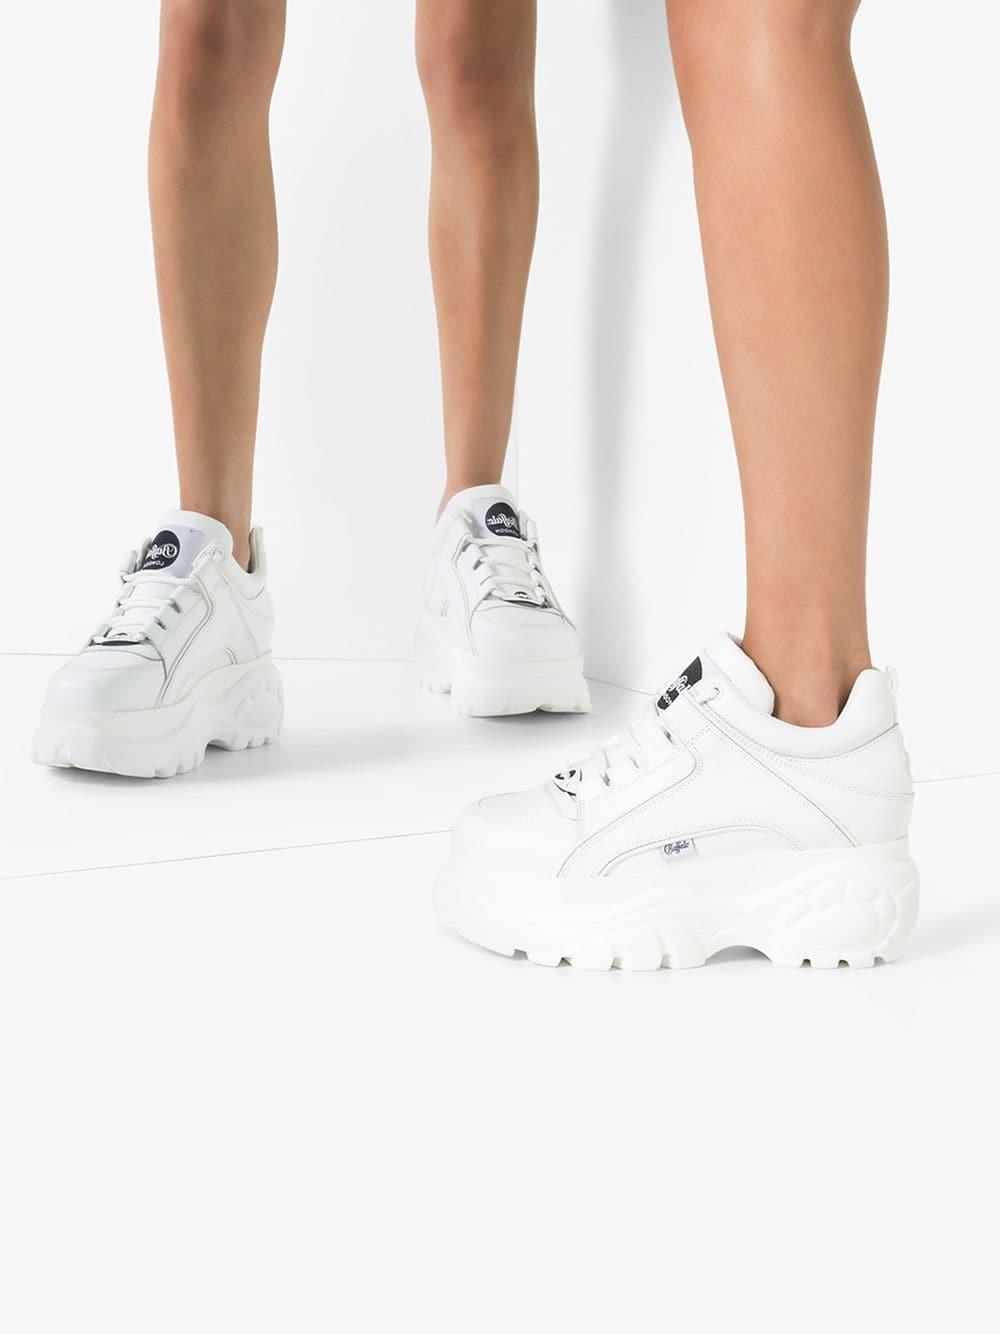 Buffalo London Classic Leather Lowtop Chunky Trainers in White | Lyst